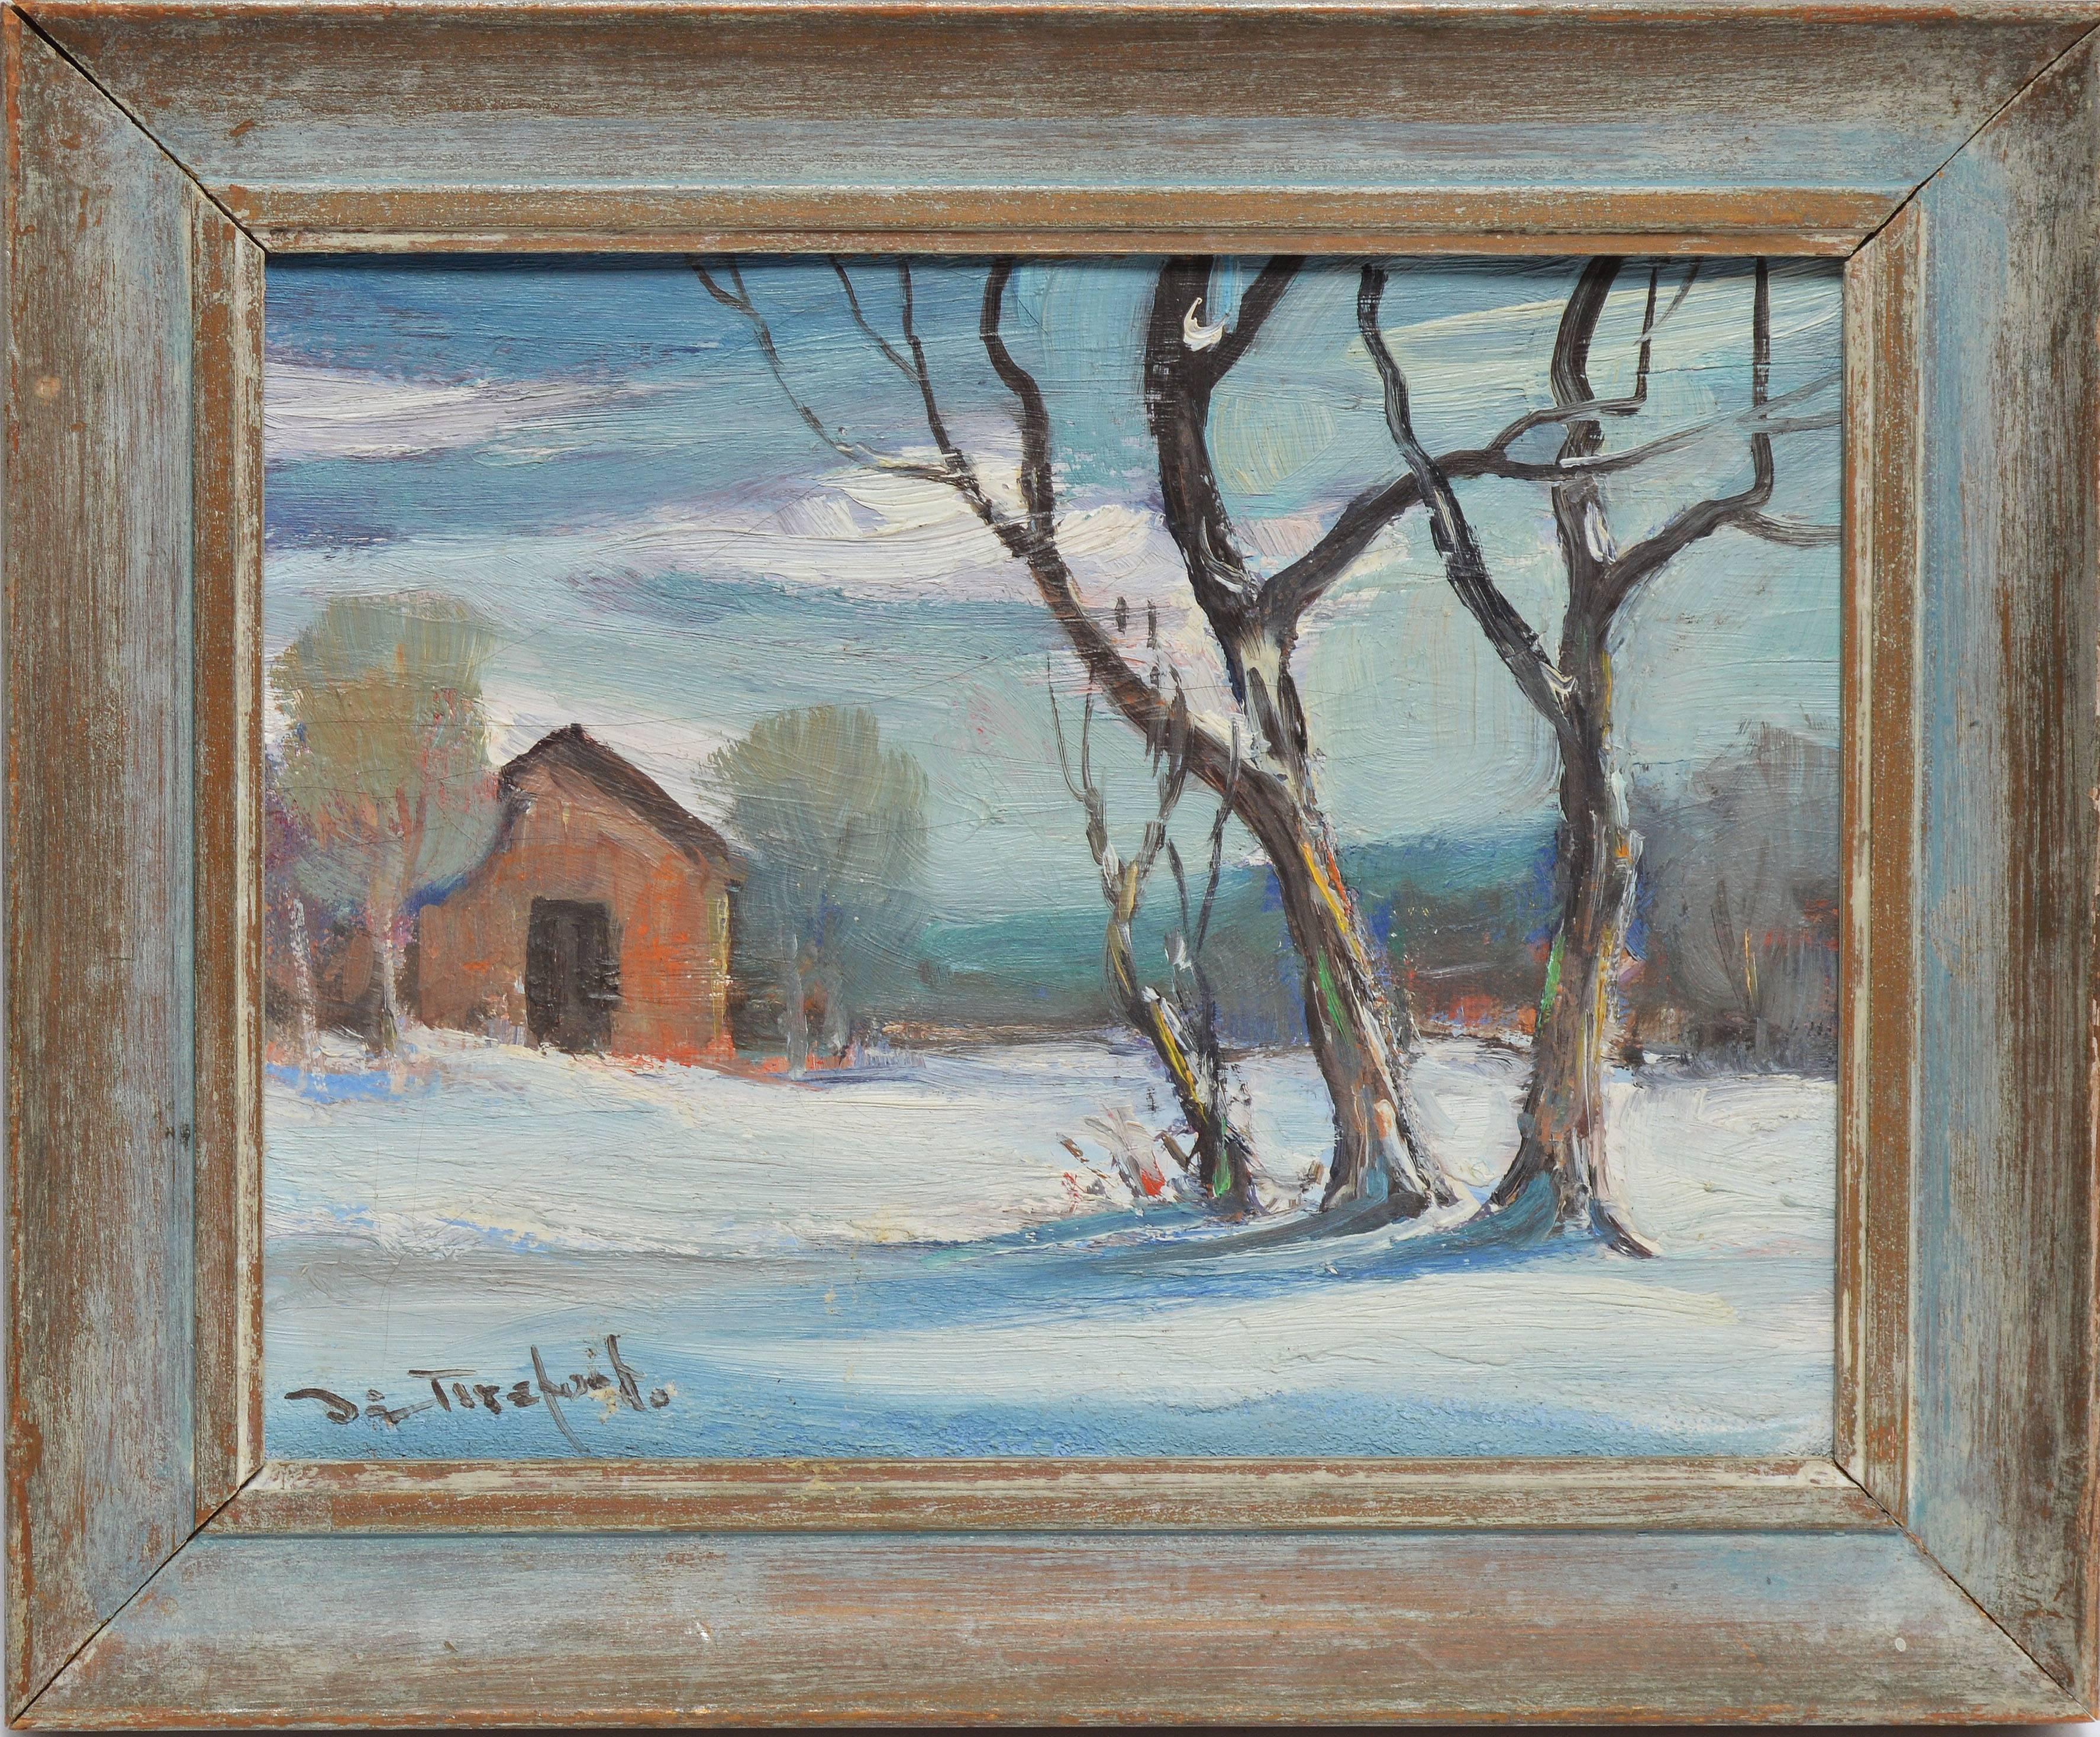 Impressionist winter landscape with a barn by Bela deTirefort  (1894 - 1993).  Oil on board, circa 1940.  Signed lower left, "DeTirefort".  Displayed in a grewood frame.  Image size, 10"L x 8"H, overall 12"L x 10"H.